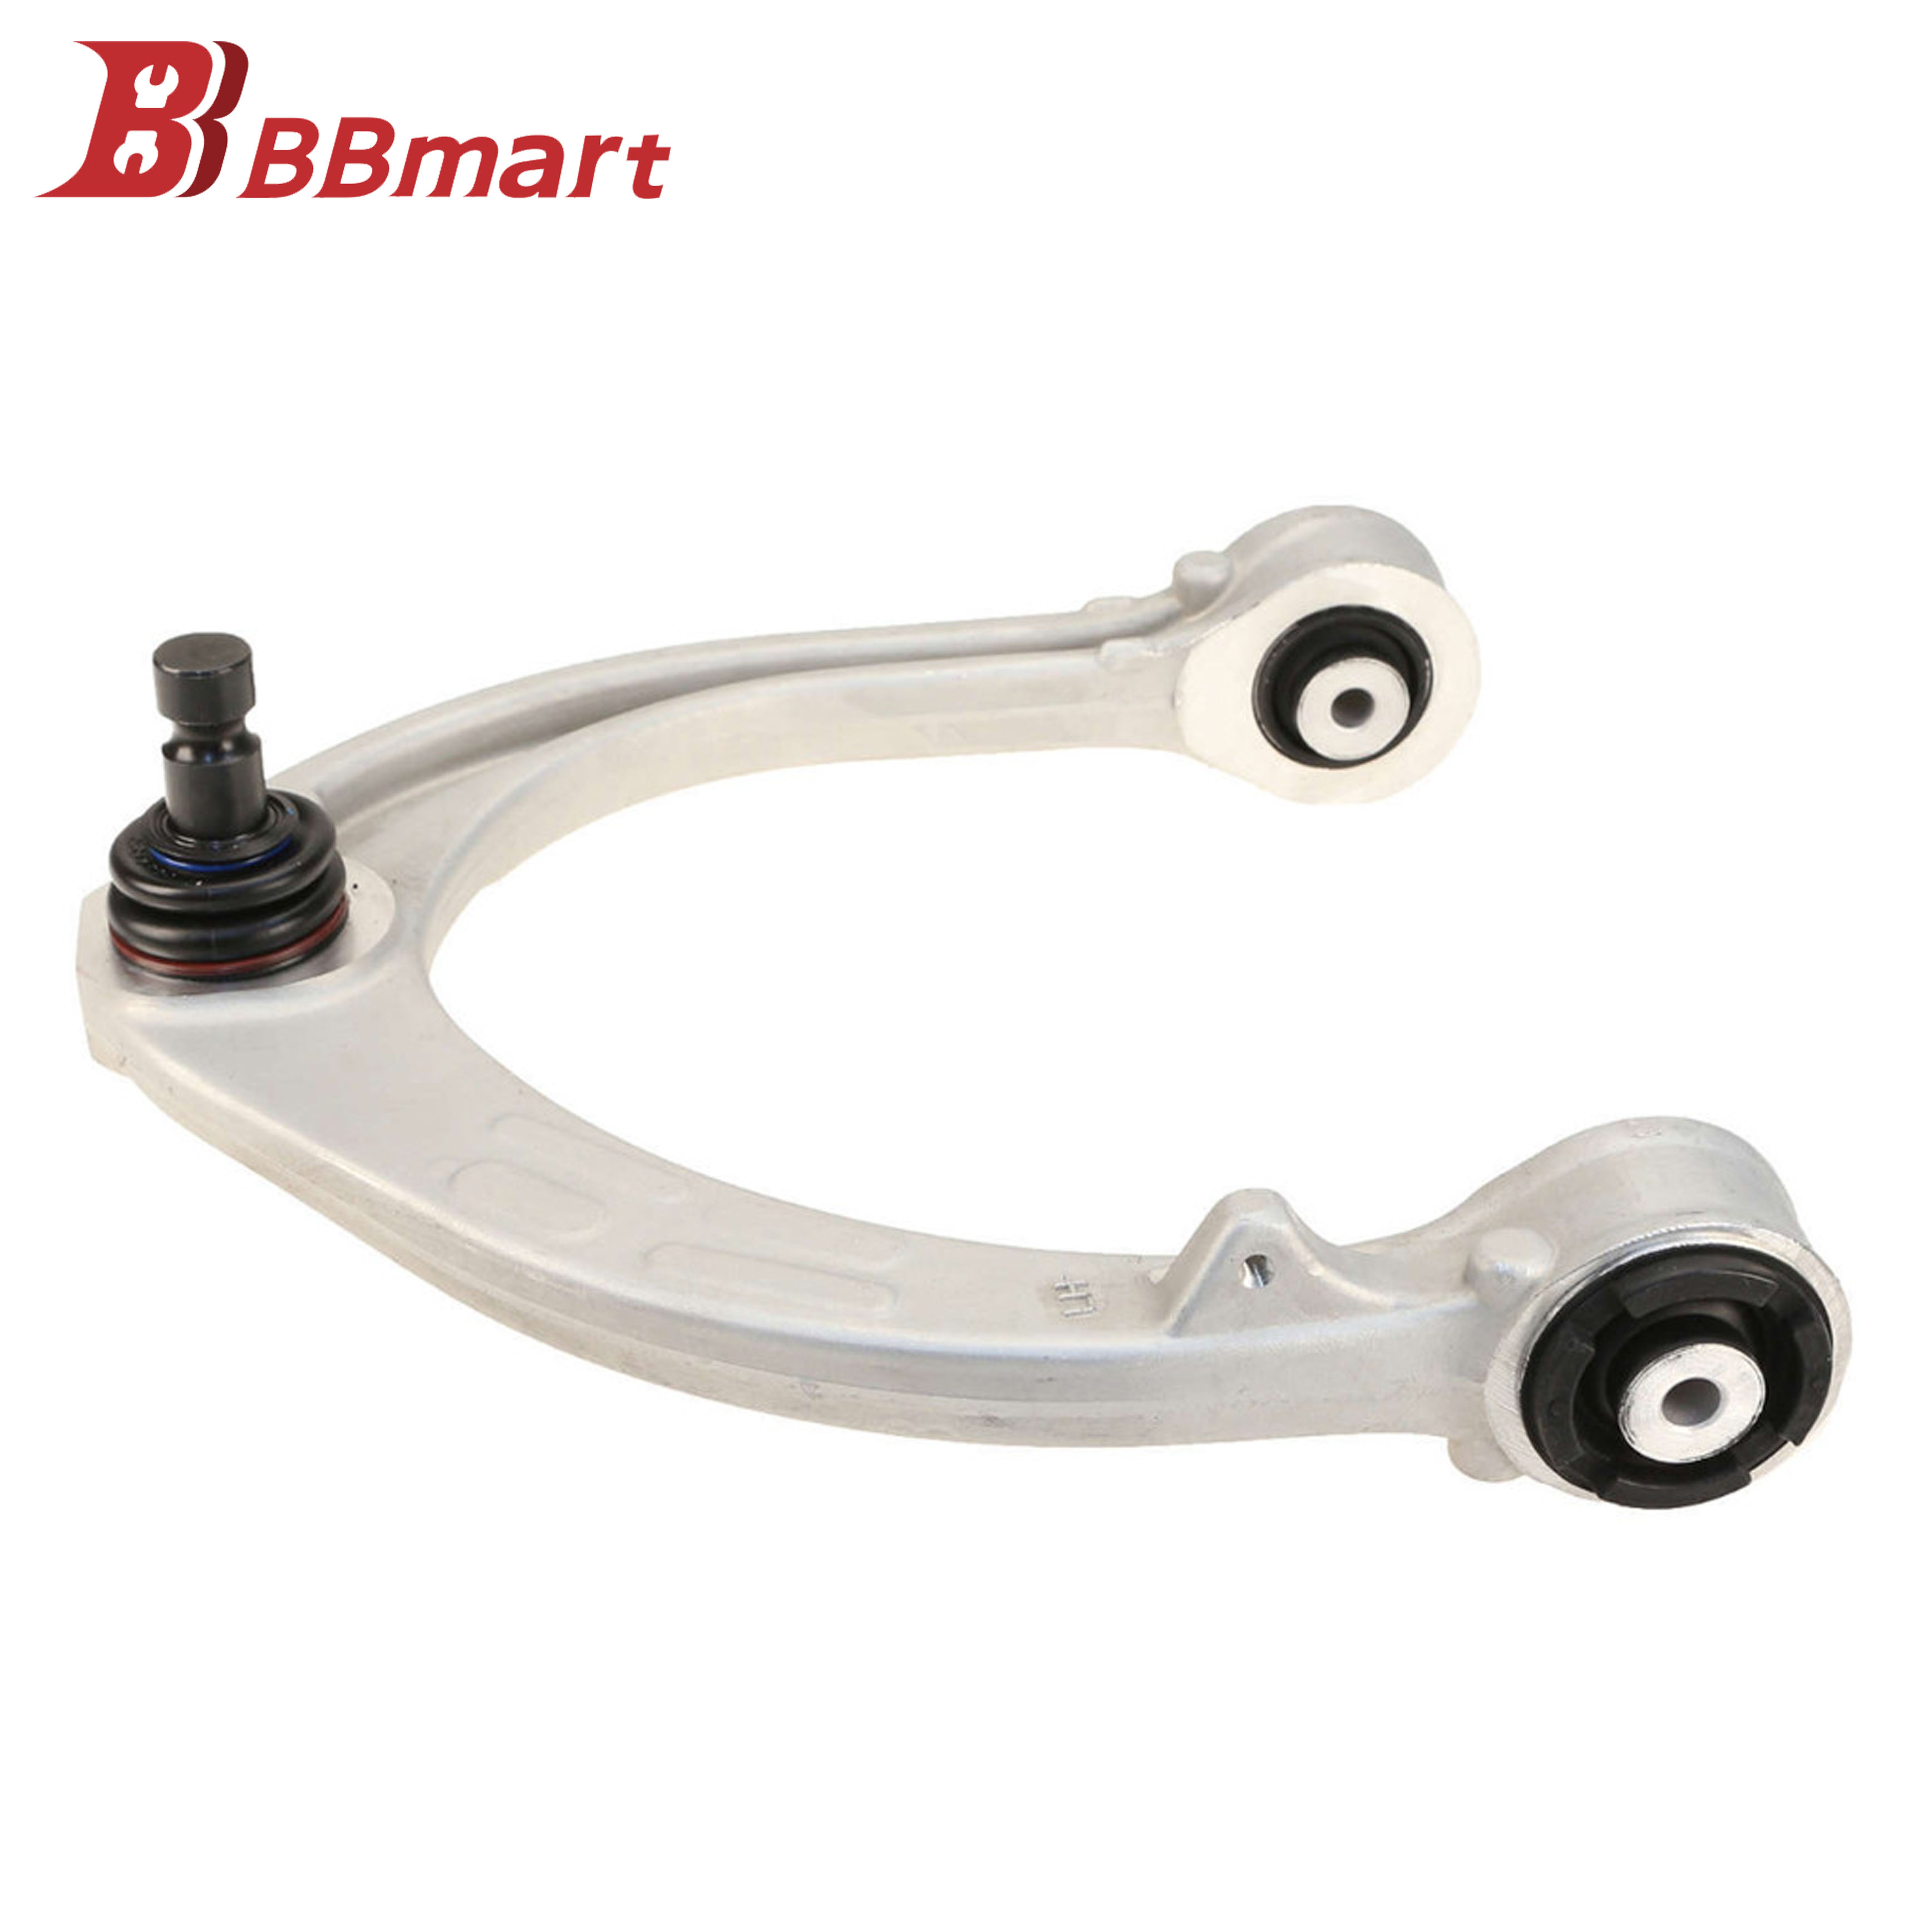 BBmart Auto Parts Front Upper Left Control Arm For Land Rover RANGE ROVER OE LR034214